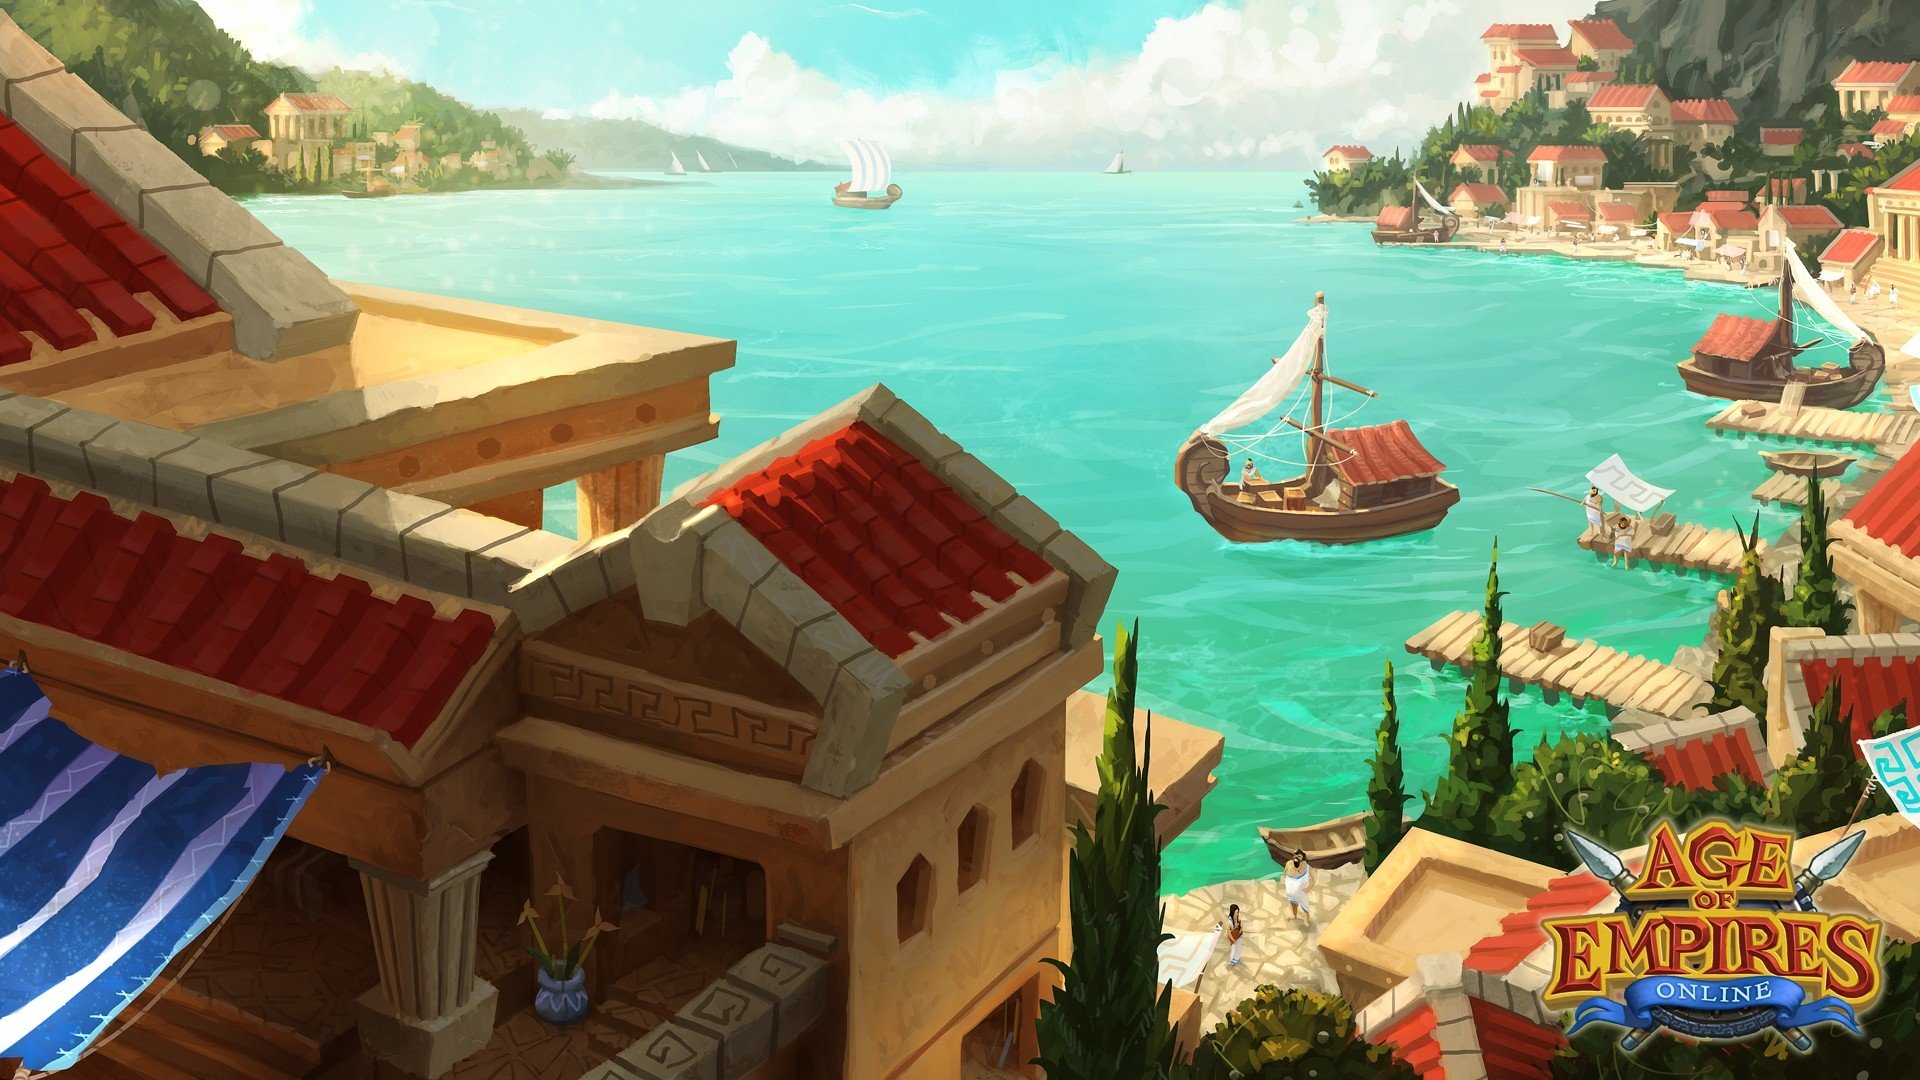 Age of Empires Online Wallpaper